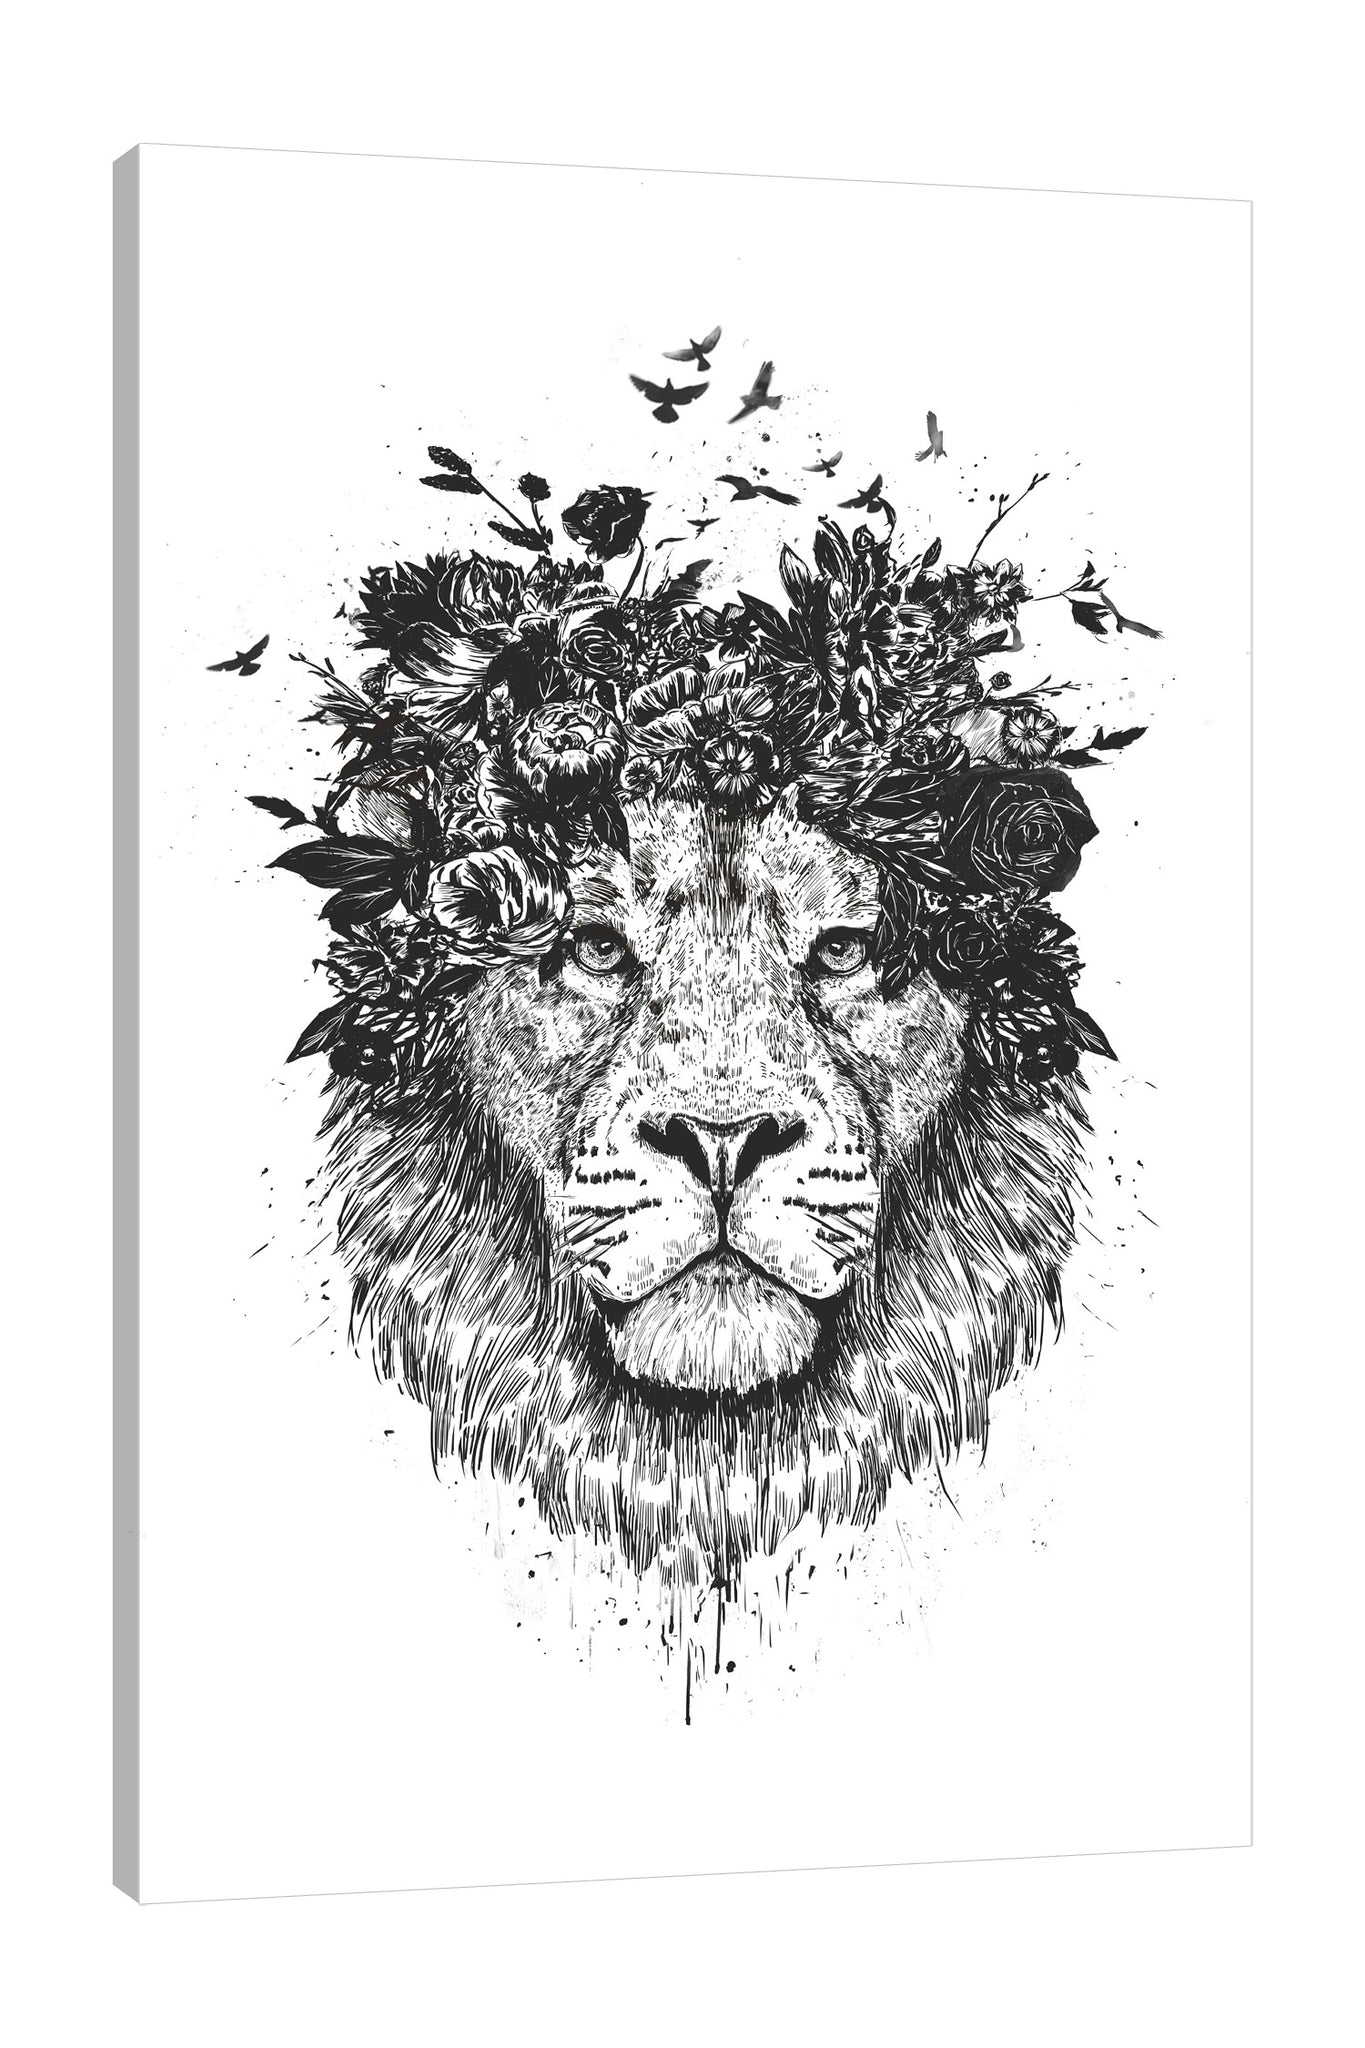 Balazs-Solti,Modern & Contemporary,Animals,Floral & Botanical,animals,animal,lion,lions,floral,florals,flowers,flower,black and white,birds,bird,paint drips,paint drip,Red,Charcoal Gray,Tan White,Mist Gray